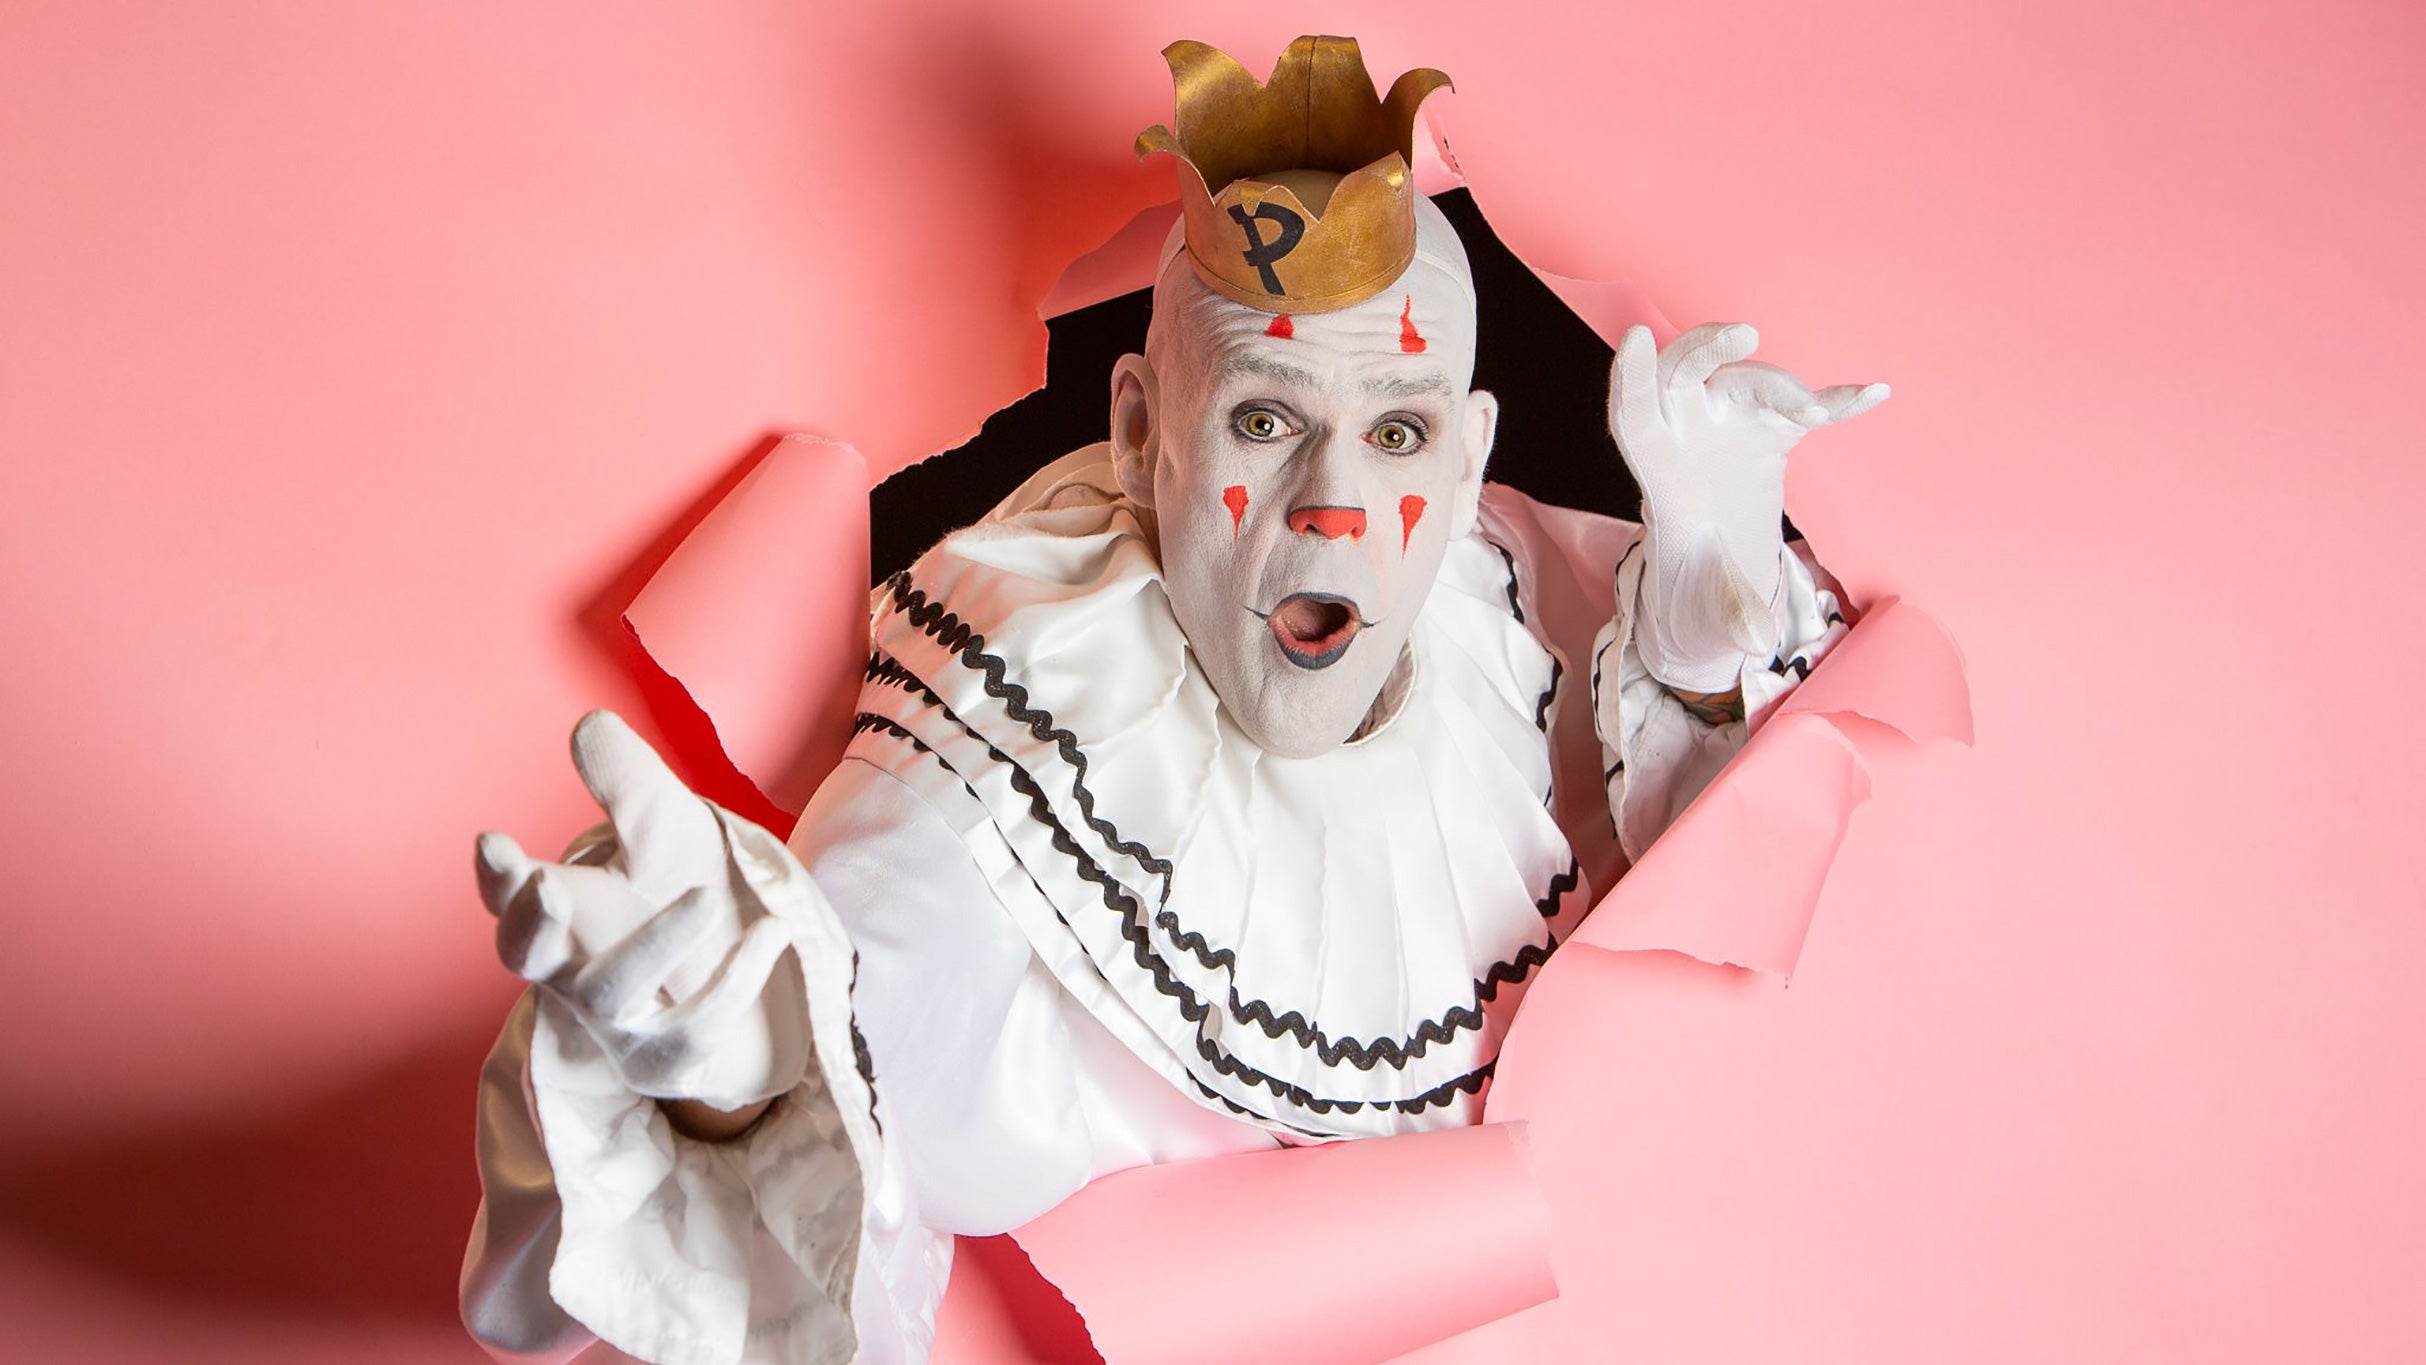 Puddles Pity Party in Waukegan promo photo for Artist presale offer code